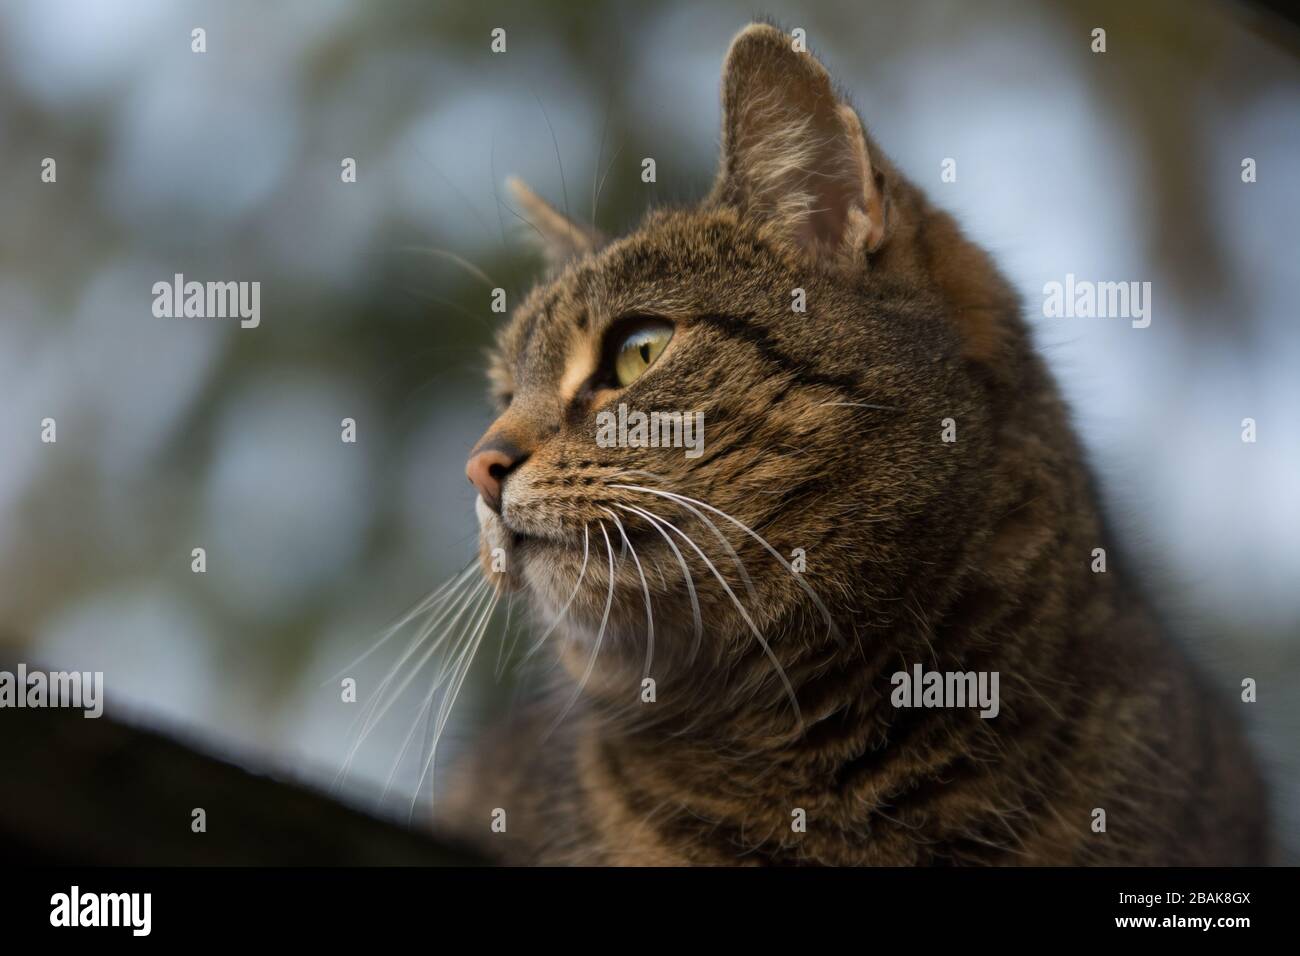 Close-up of a grey striped tabby cat looking left Stock Photo